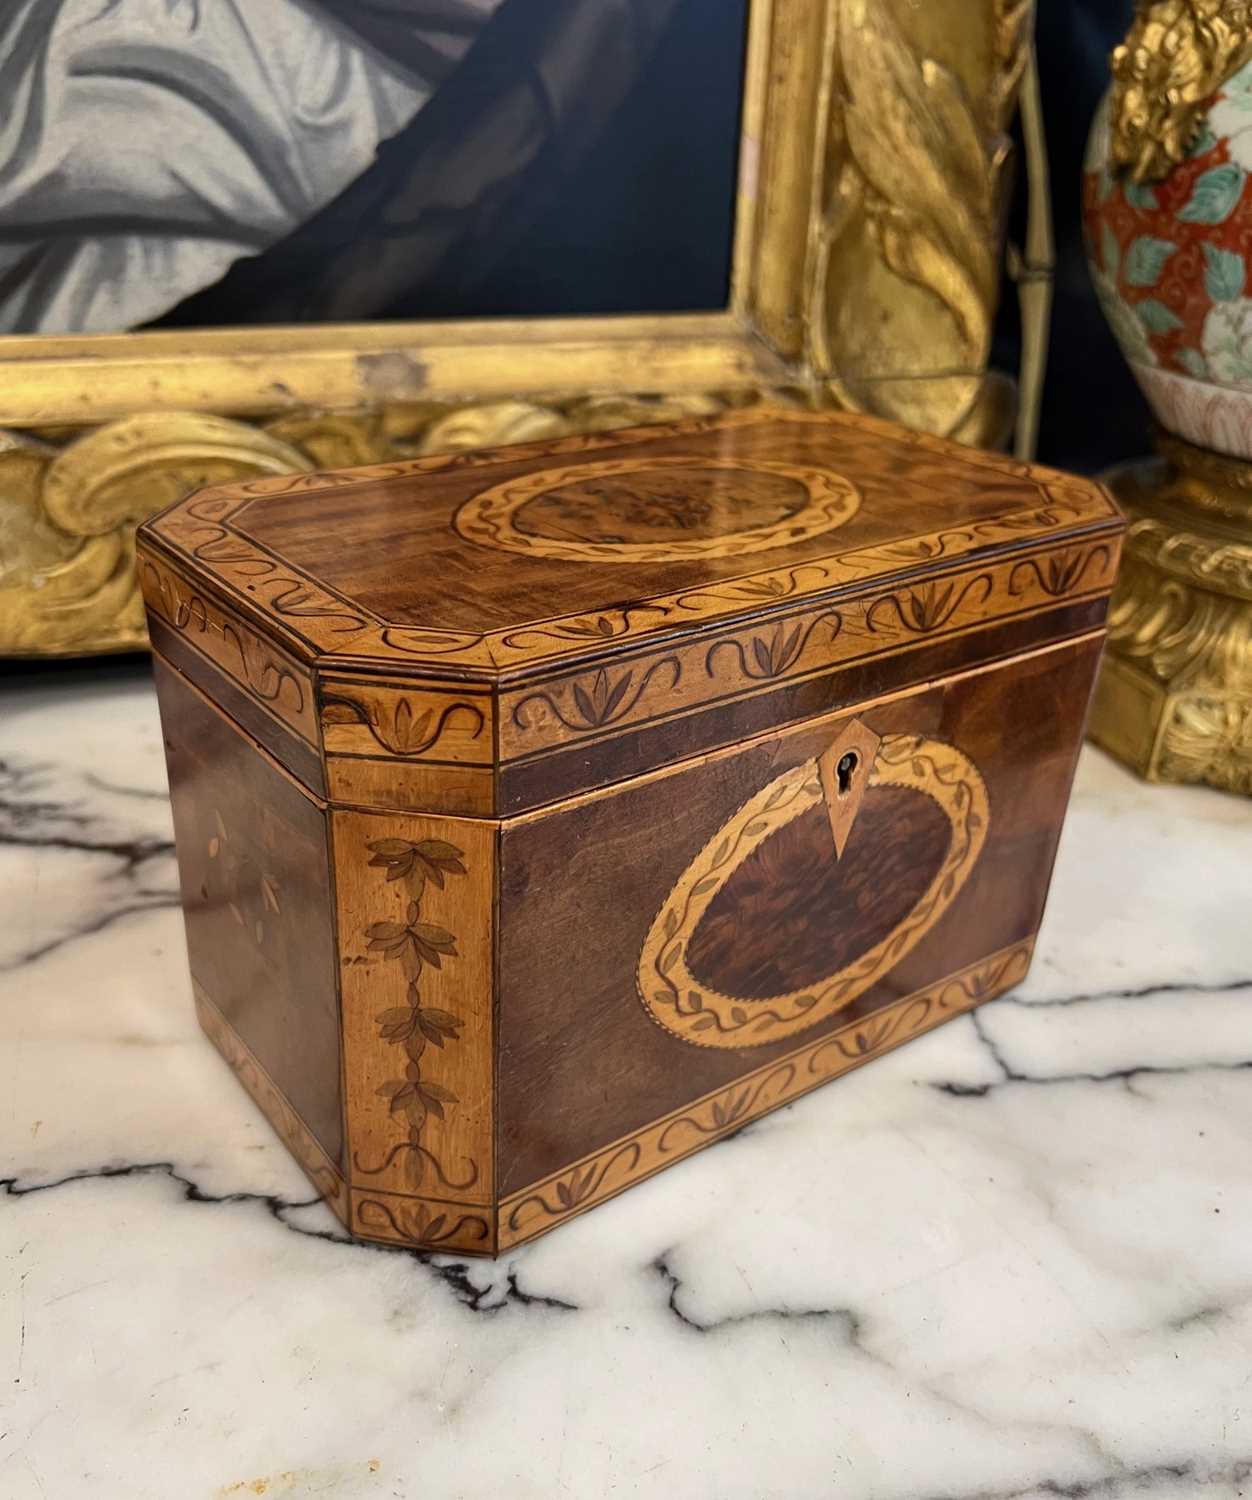 A FINE LATE 18TH / EARLY 19TH CENTURY INLAID SATINWOOD TEA CADDY